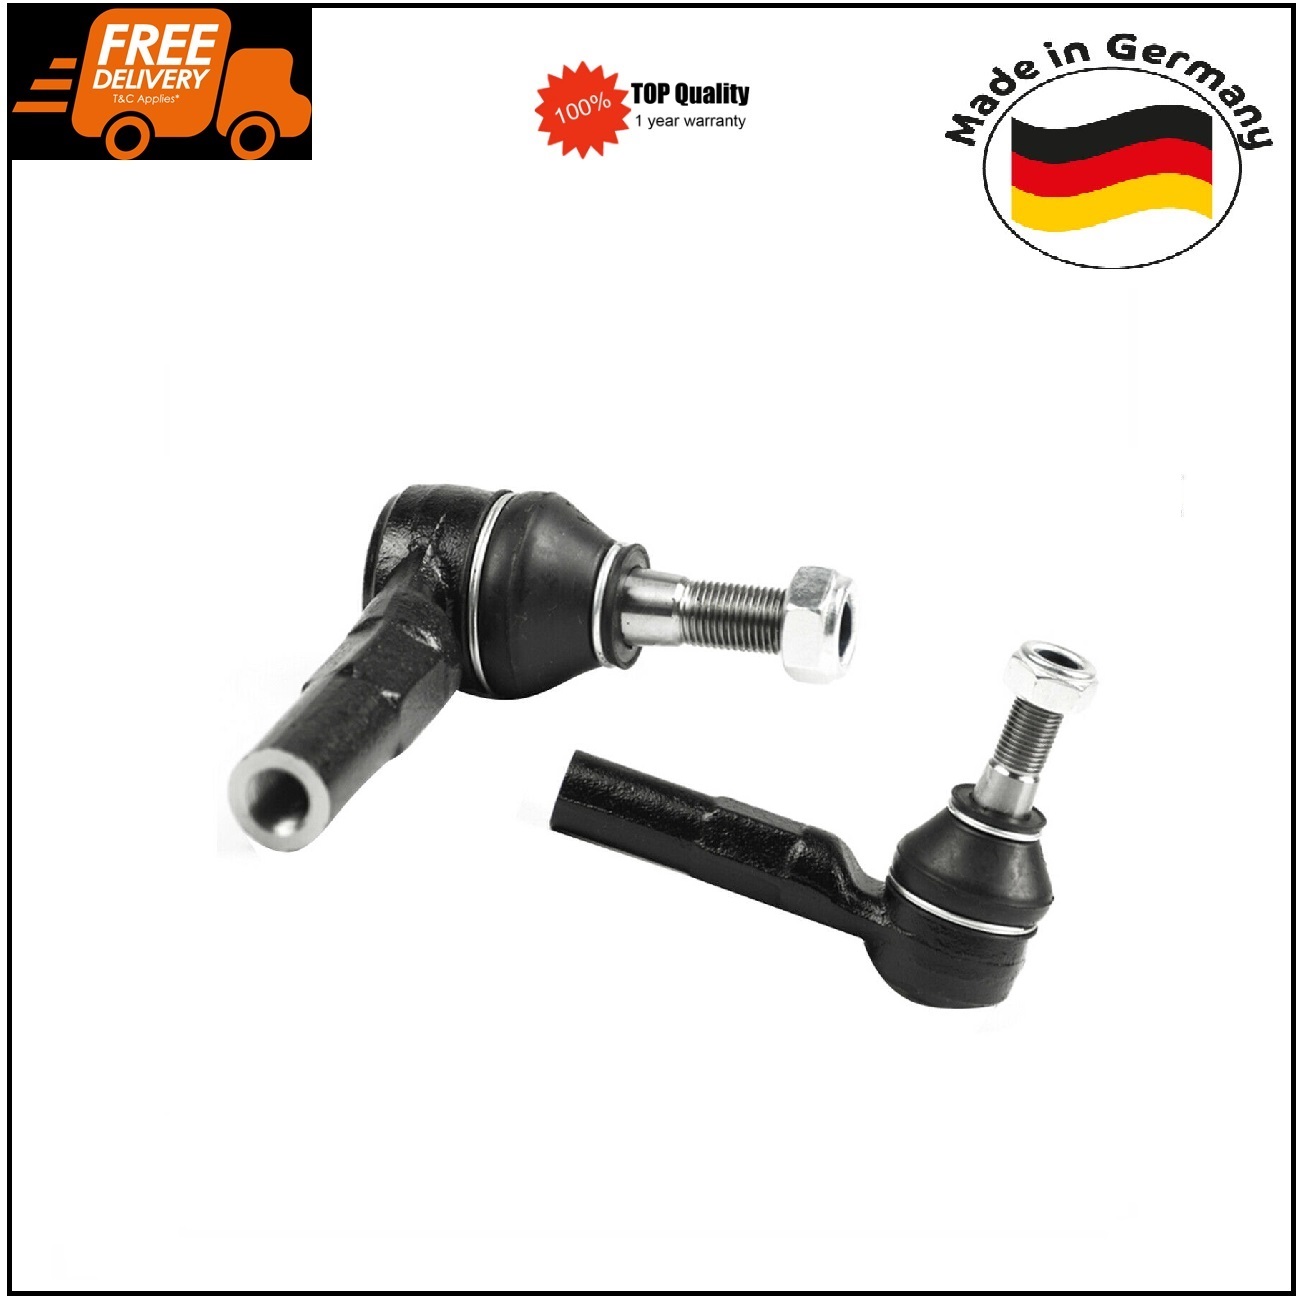 2Pcs Front Tie Rod Ends for Toyota MR2 Paseo Starlet 1.5 1.3 4504619206 German Made